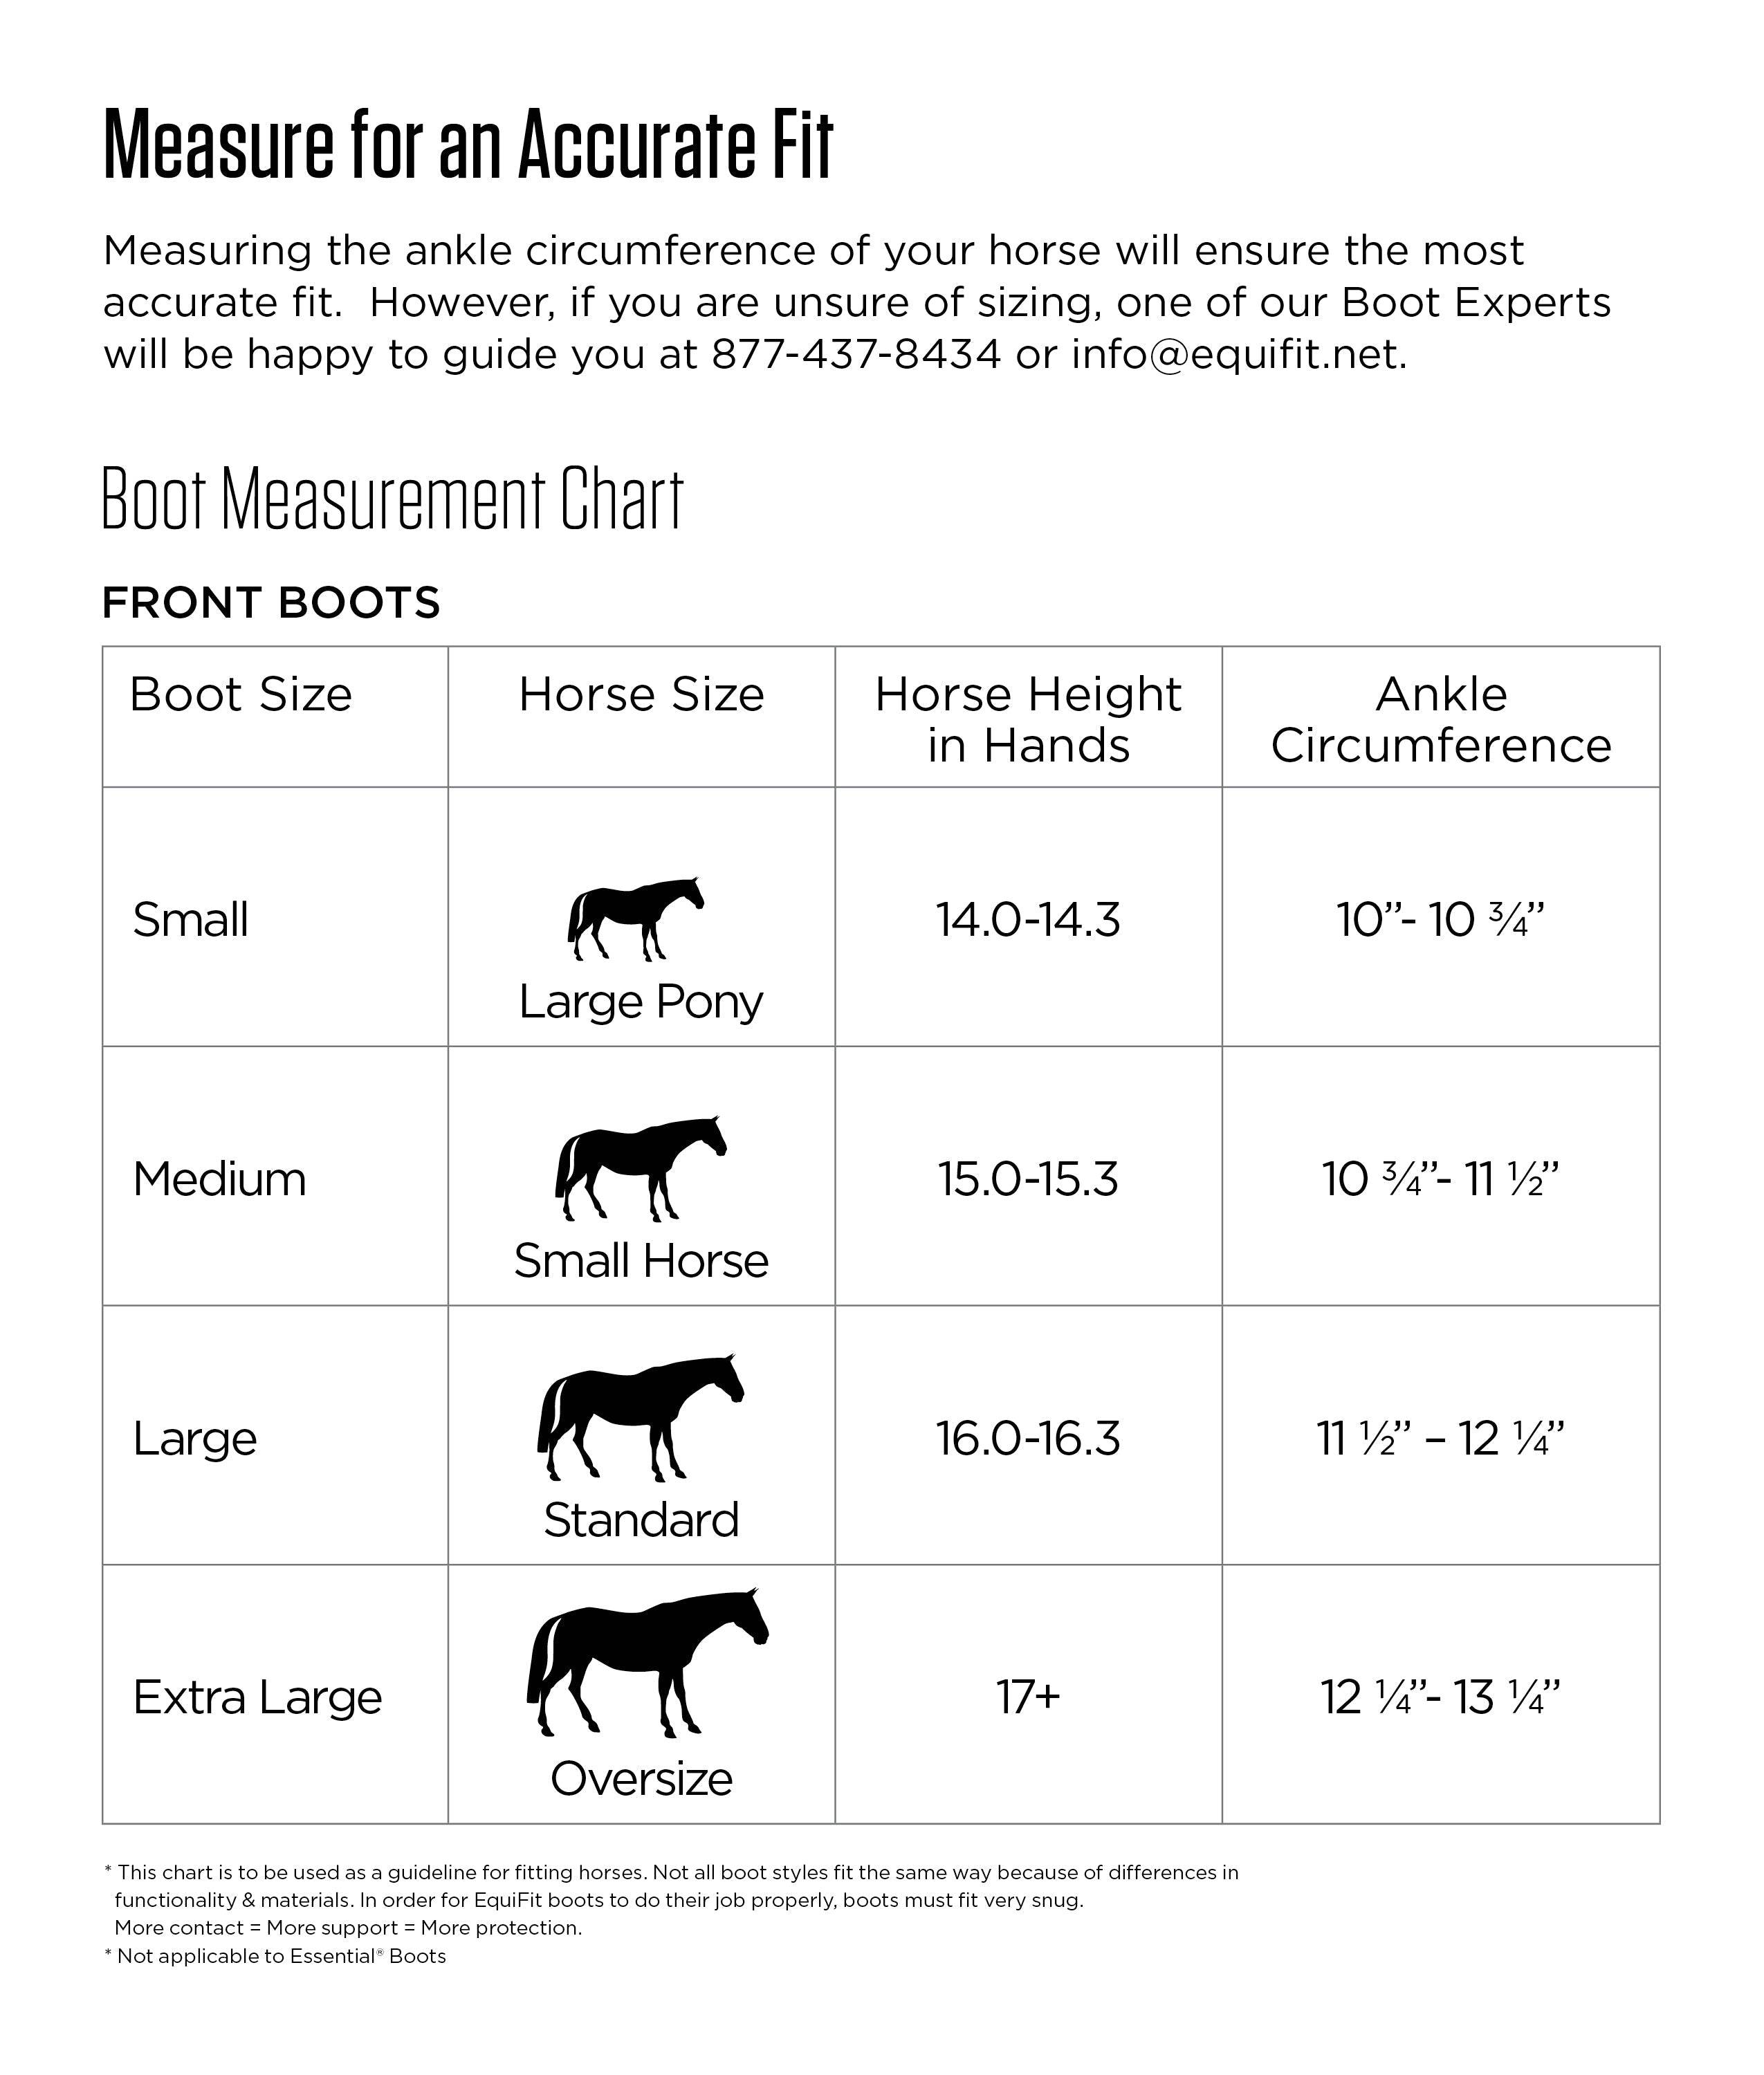 EquiFIT Essential: The Original Open Front Boot